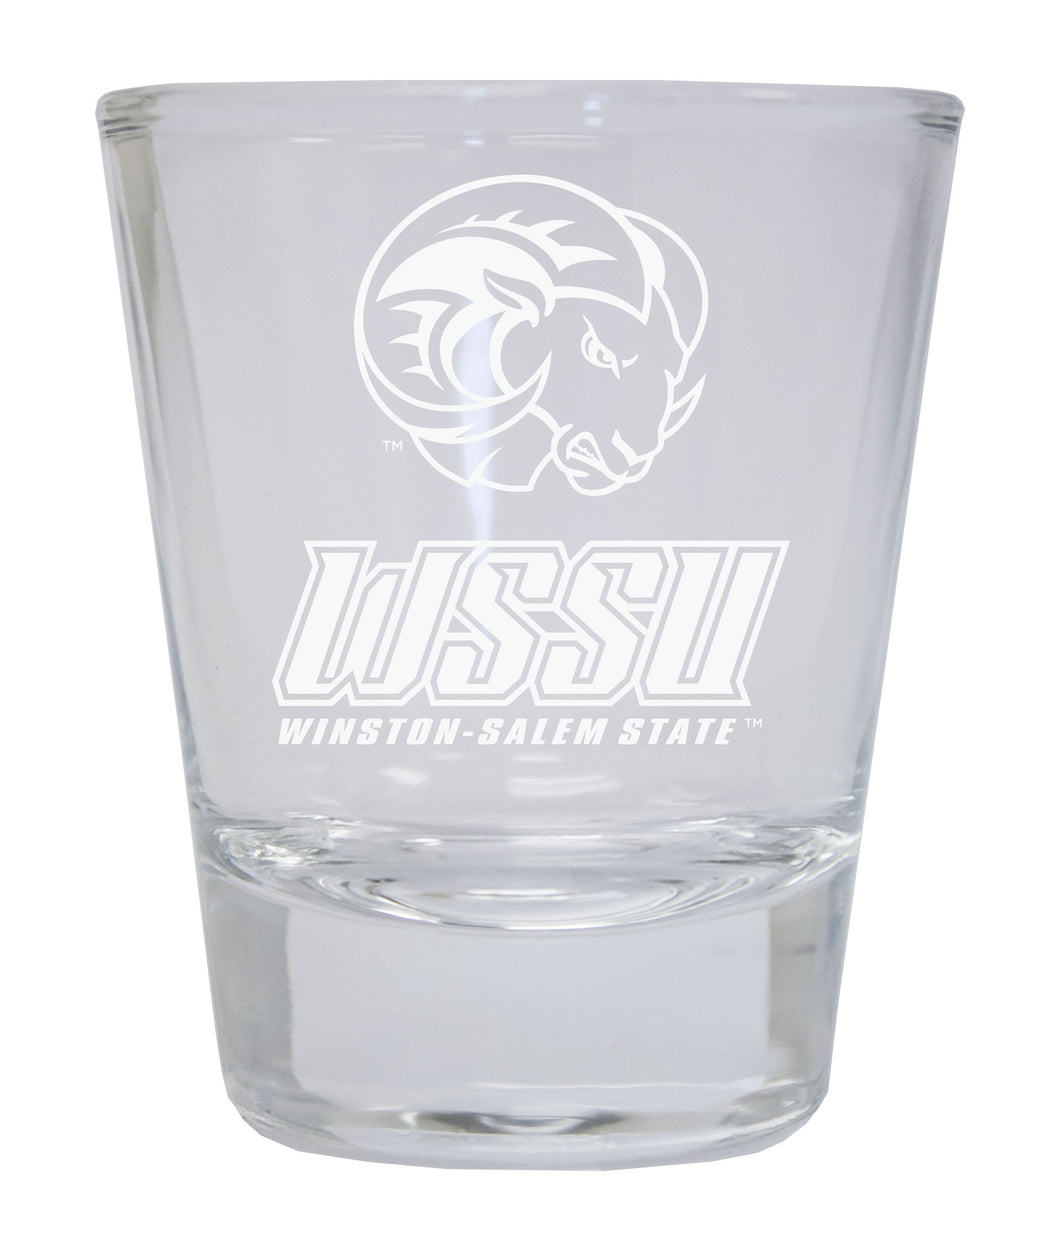 Winston-Salem State Etched Round Shot Glass Officially Licensed Collegiate Product